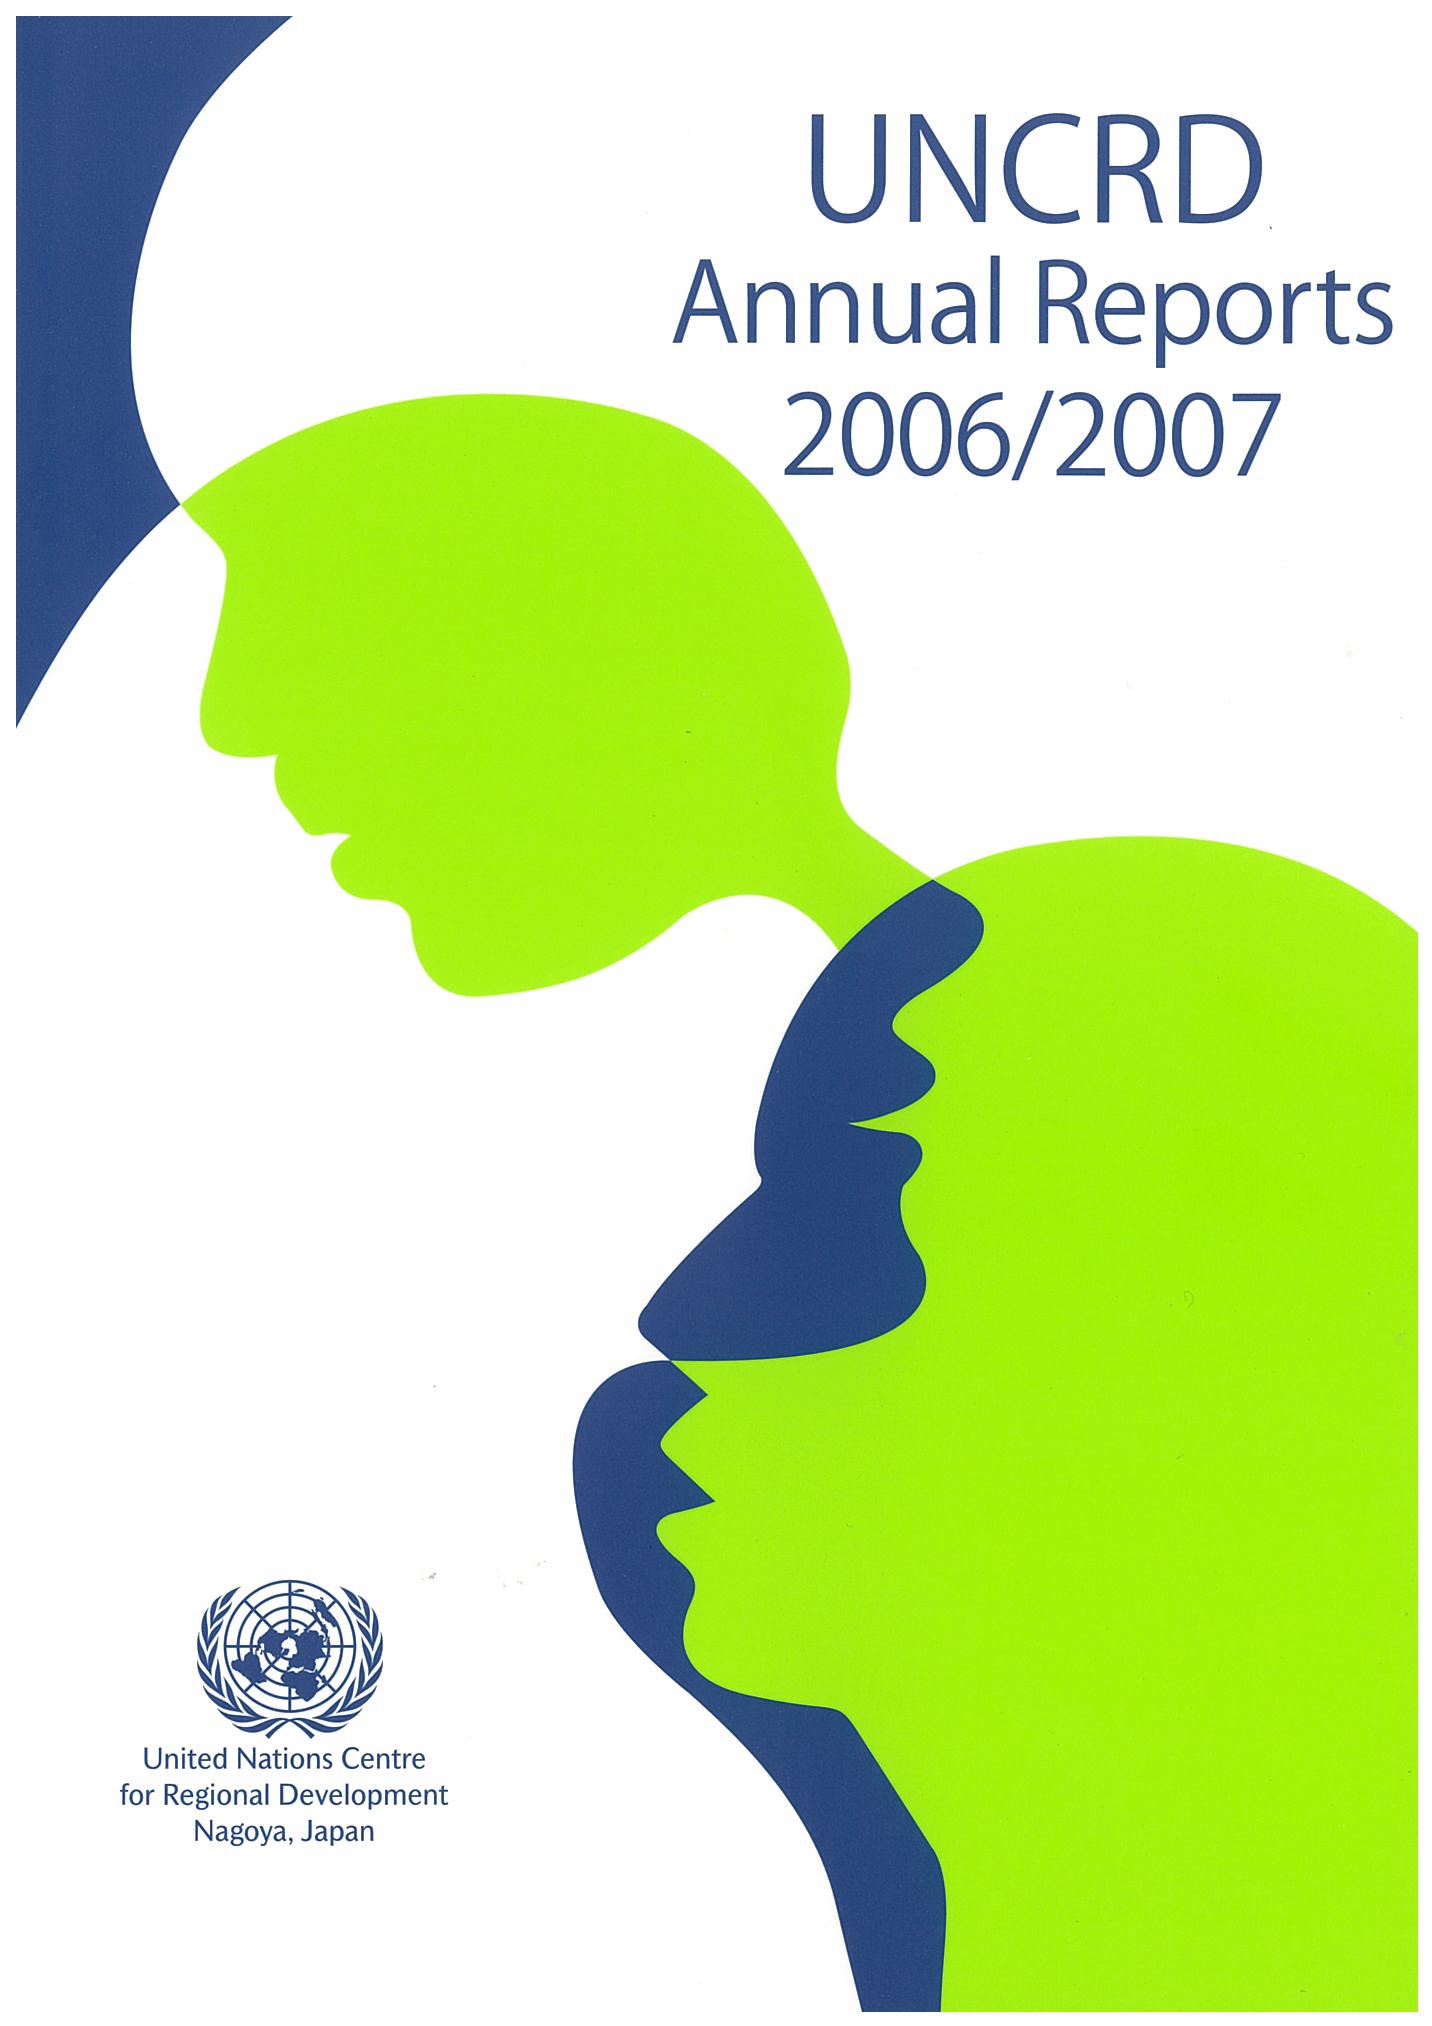 Cover of the UNCRD Annual Reports 2006/07